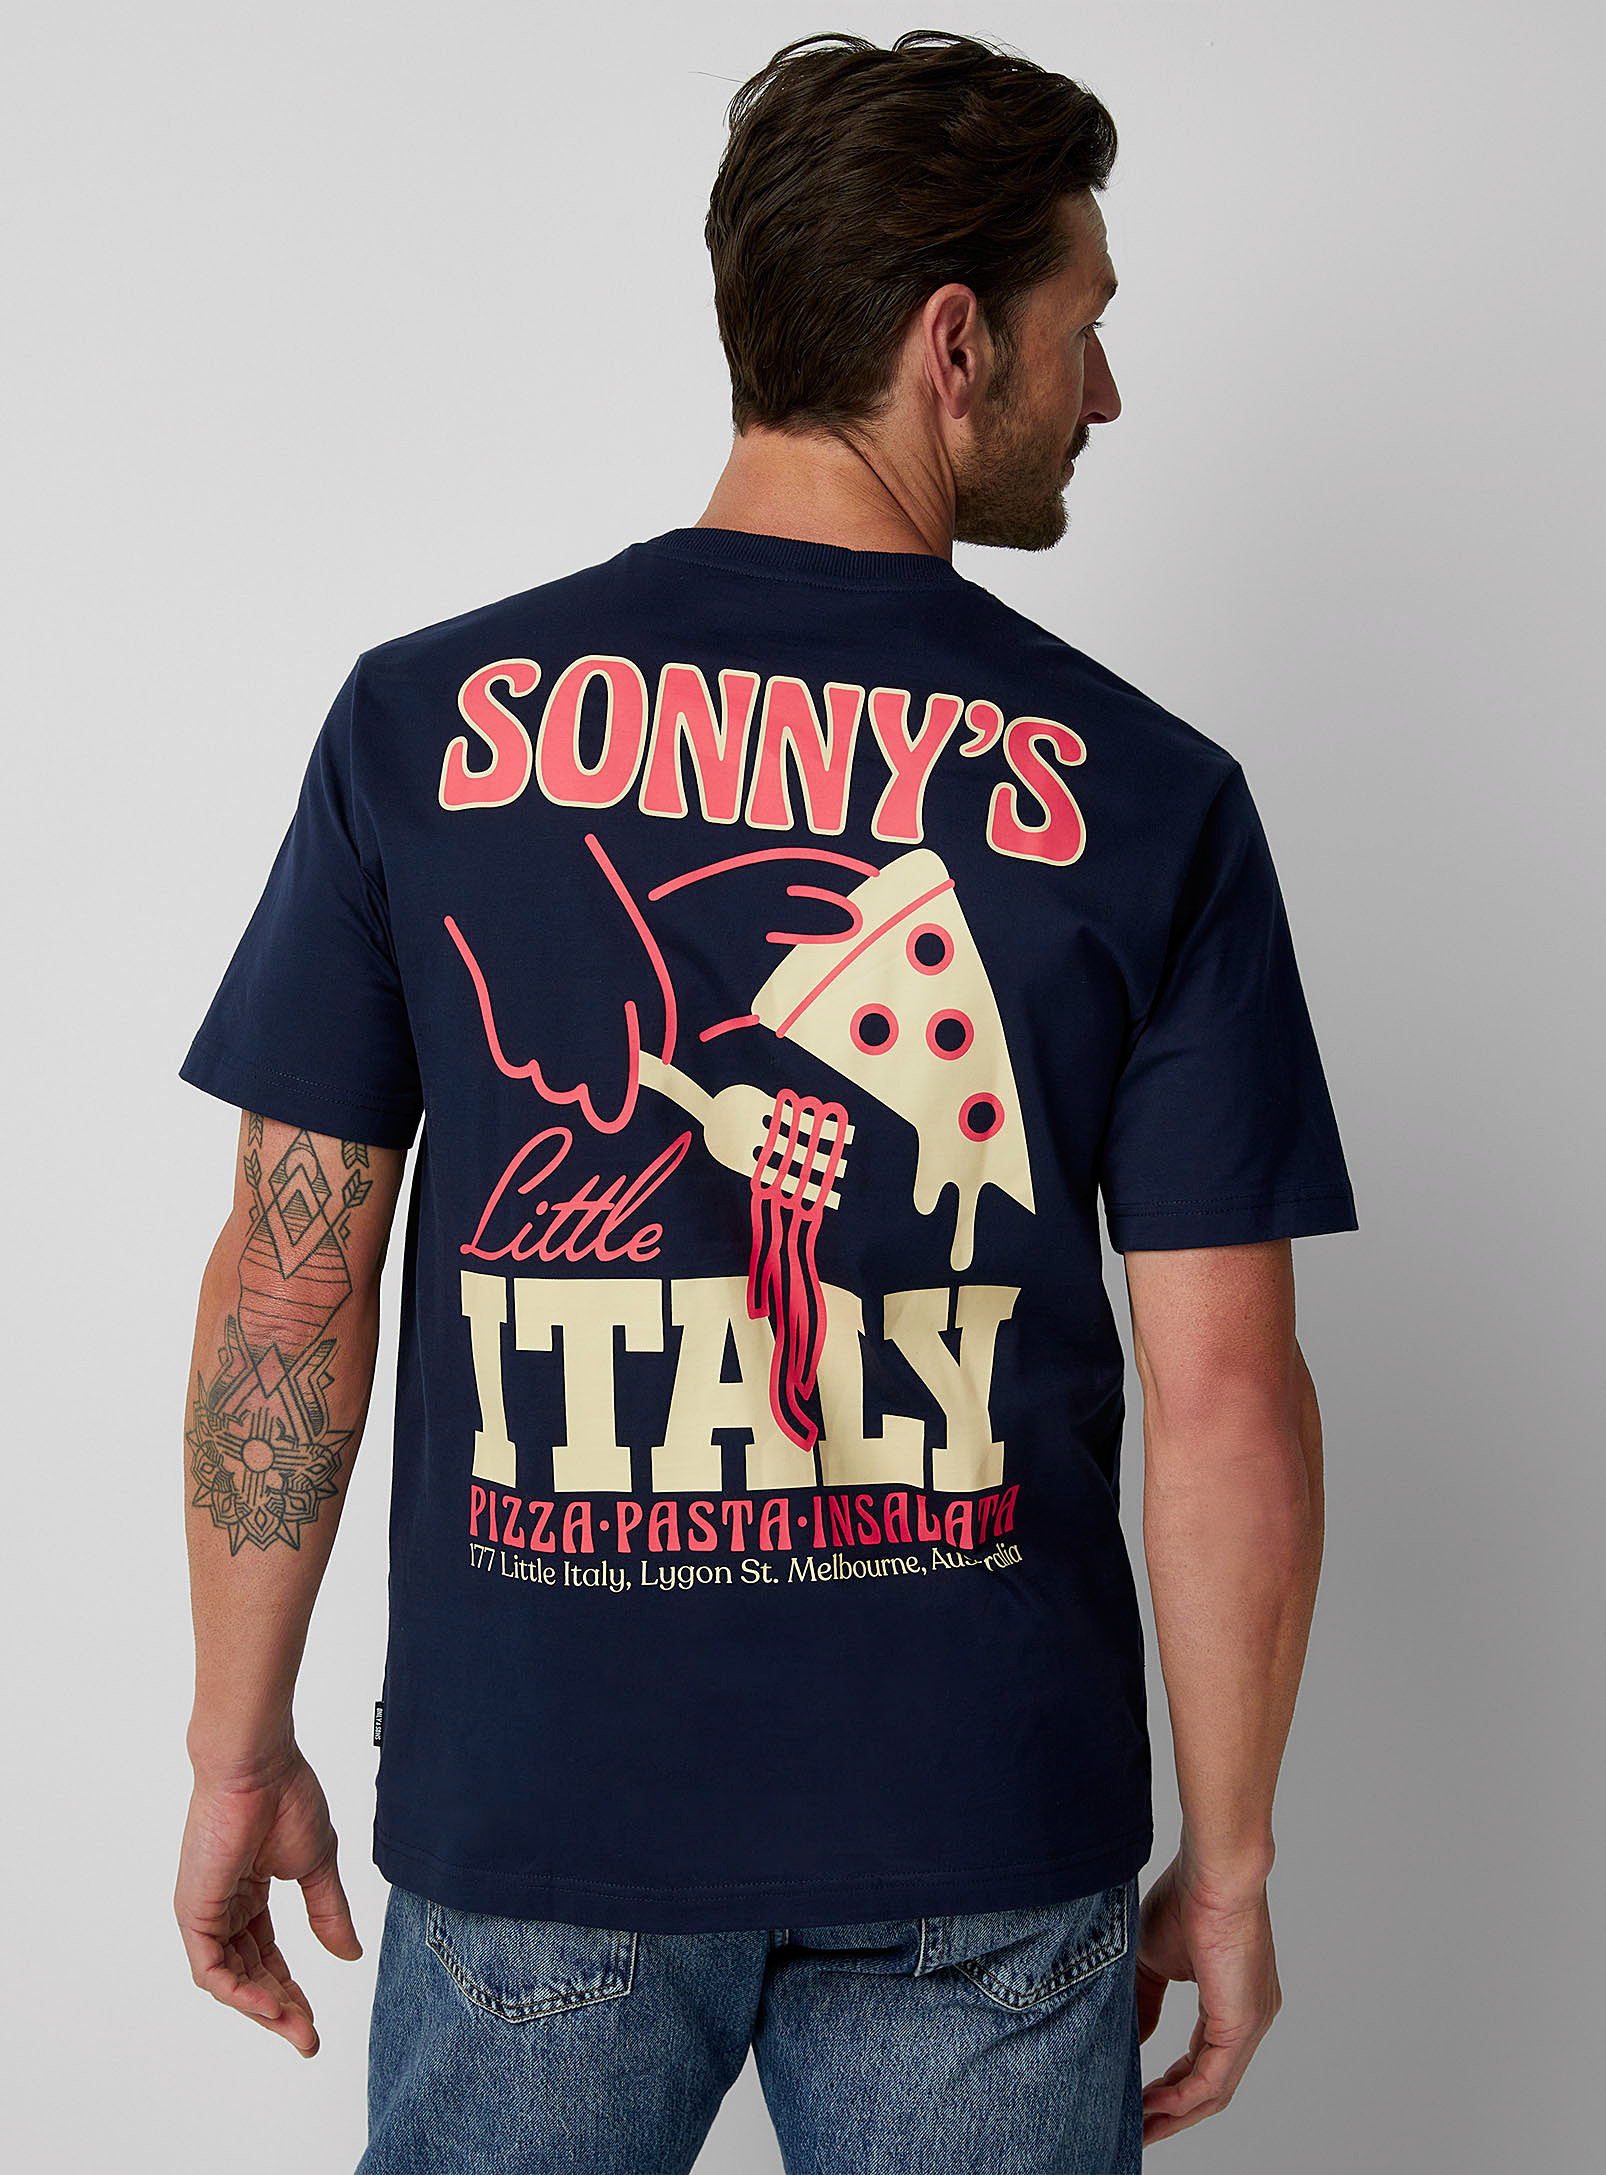 Only & Sons - Men's Little Italy T-shirt